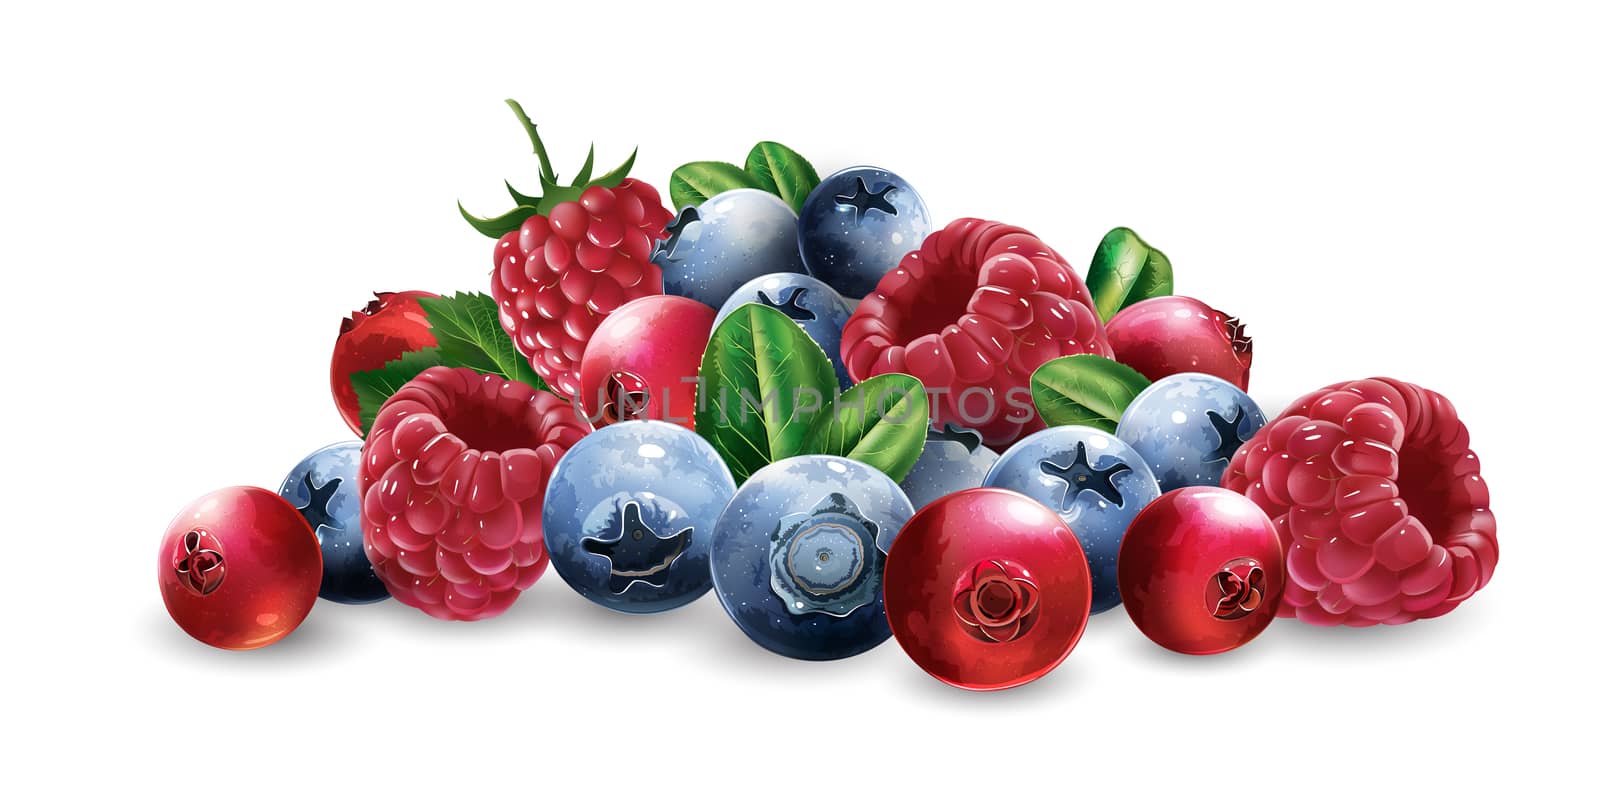 Raspberries, cranberries, blueberries and strawberries on a white background.